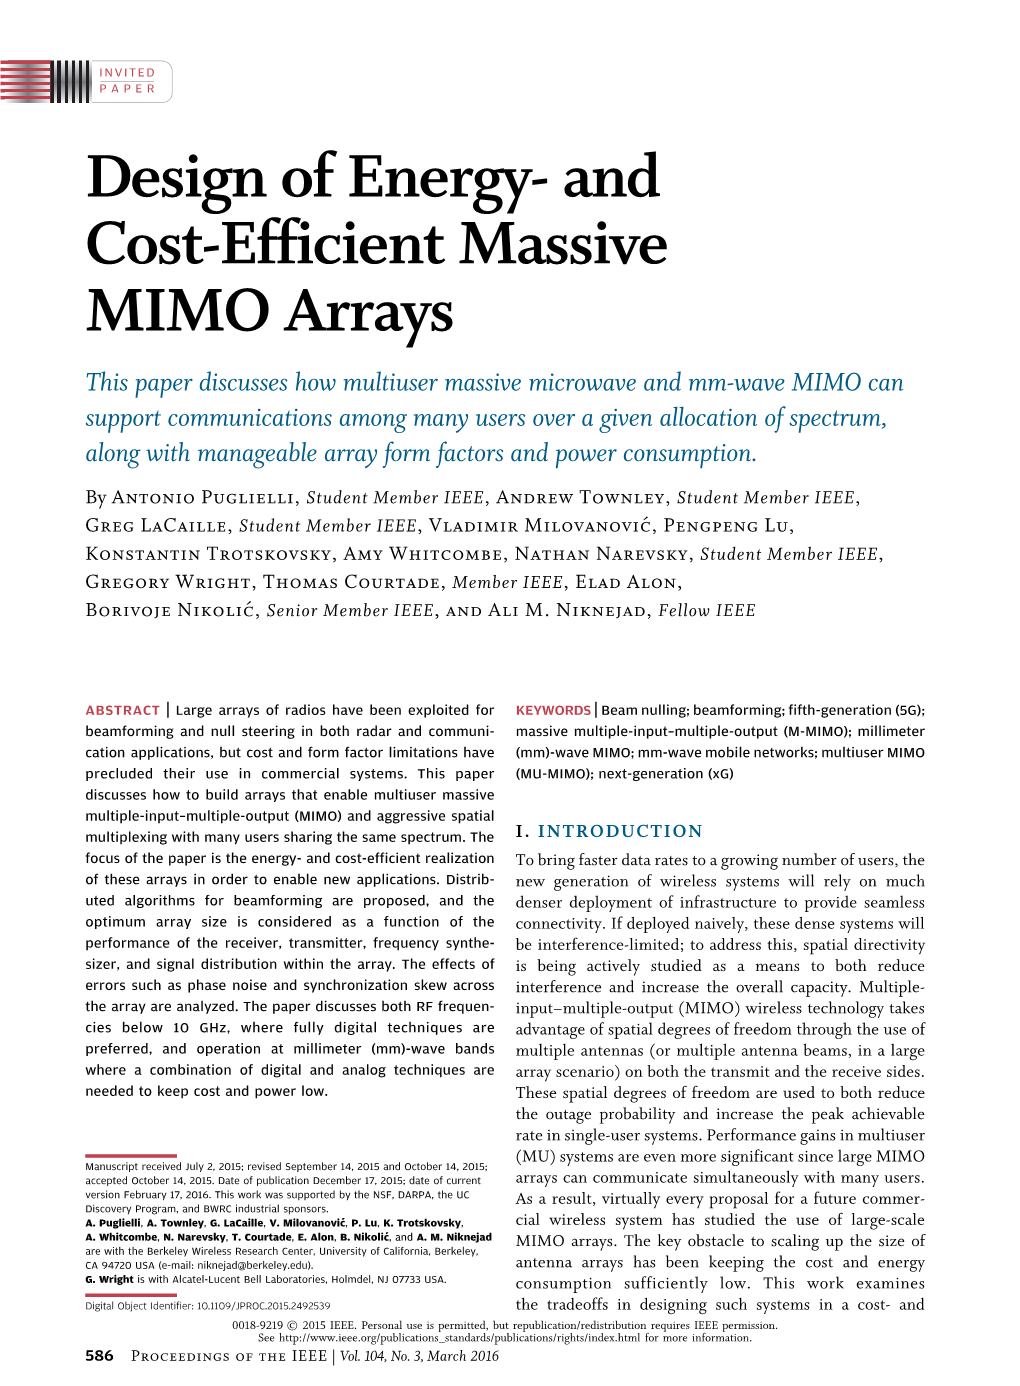 Design of Energy- and Cost-Efficient Massive MIMO Arrays